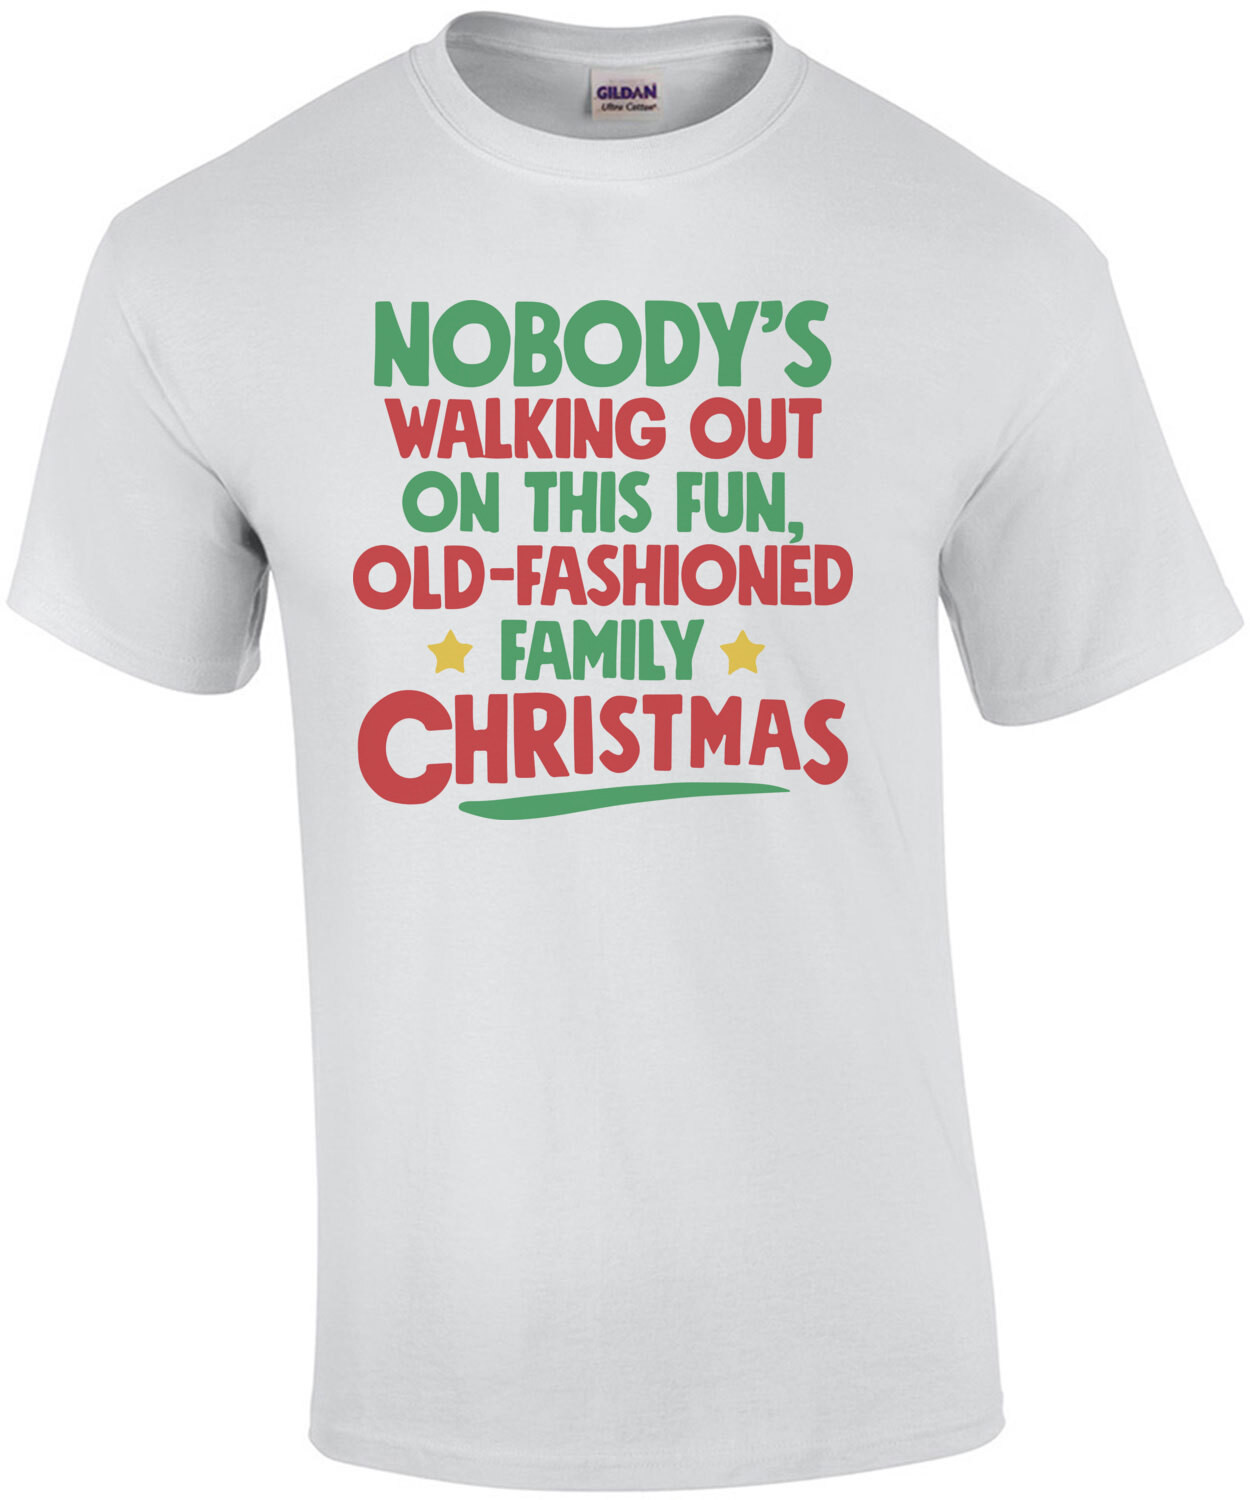 Nobody's walking out on this fun old-fashioned family Christmas - Christmas Vacation T-Shirt